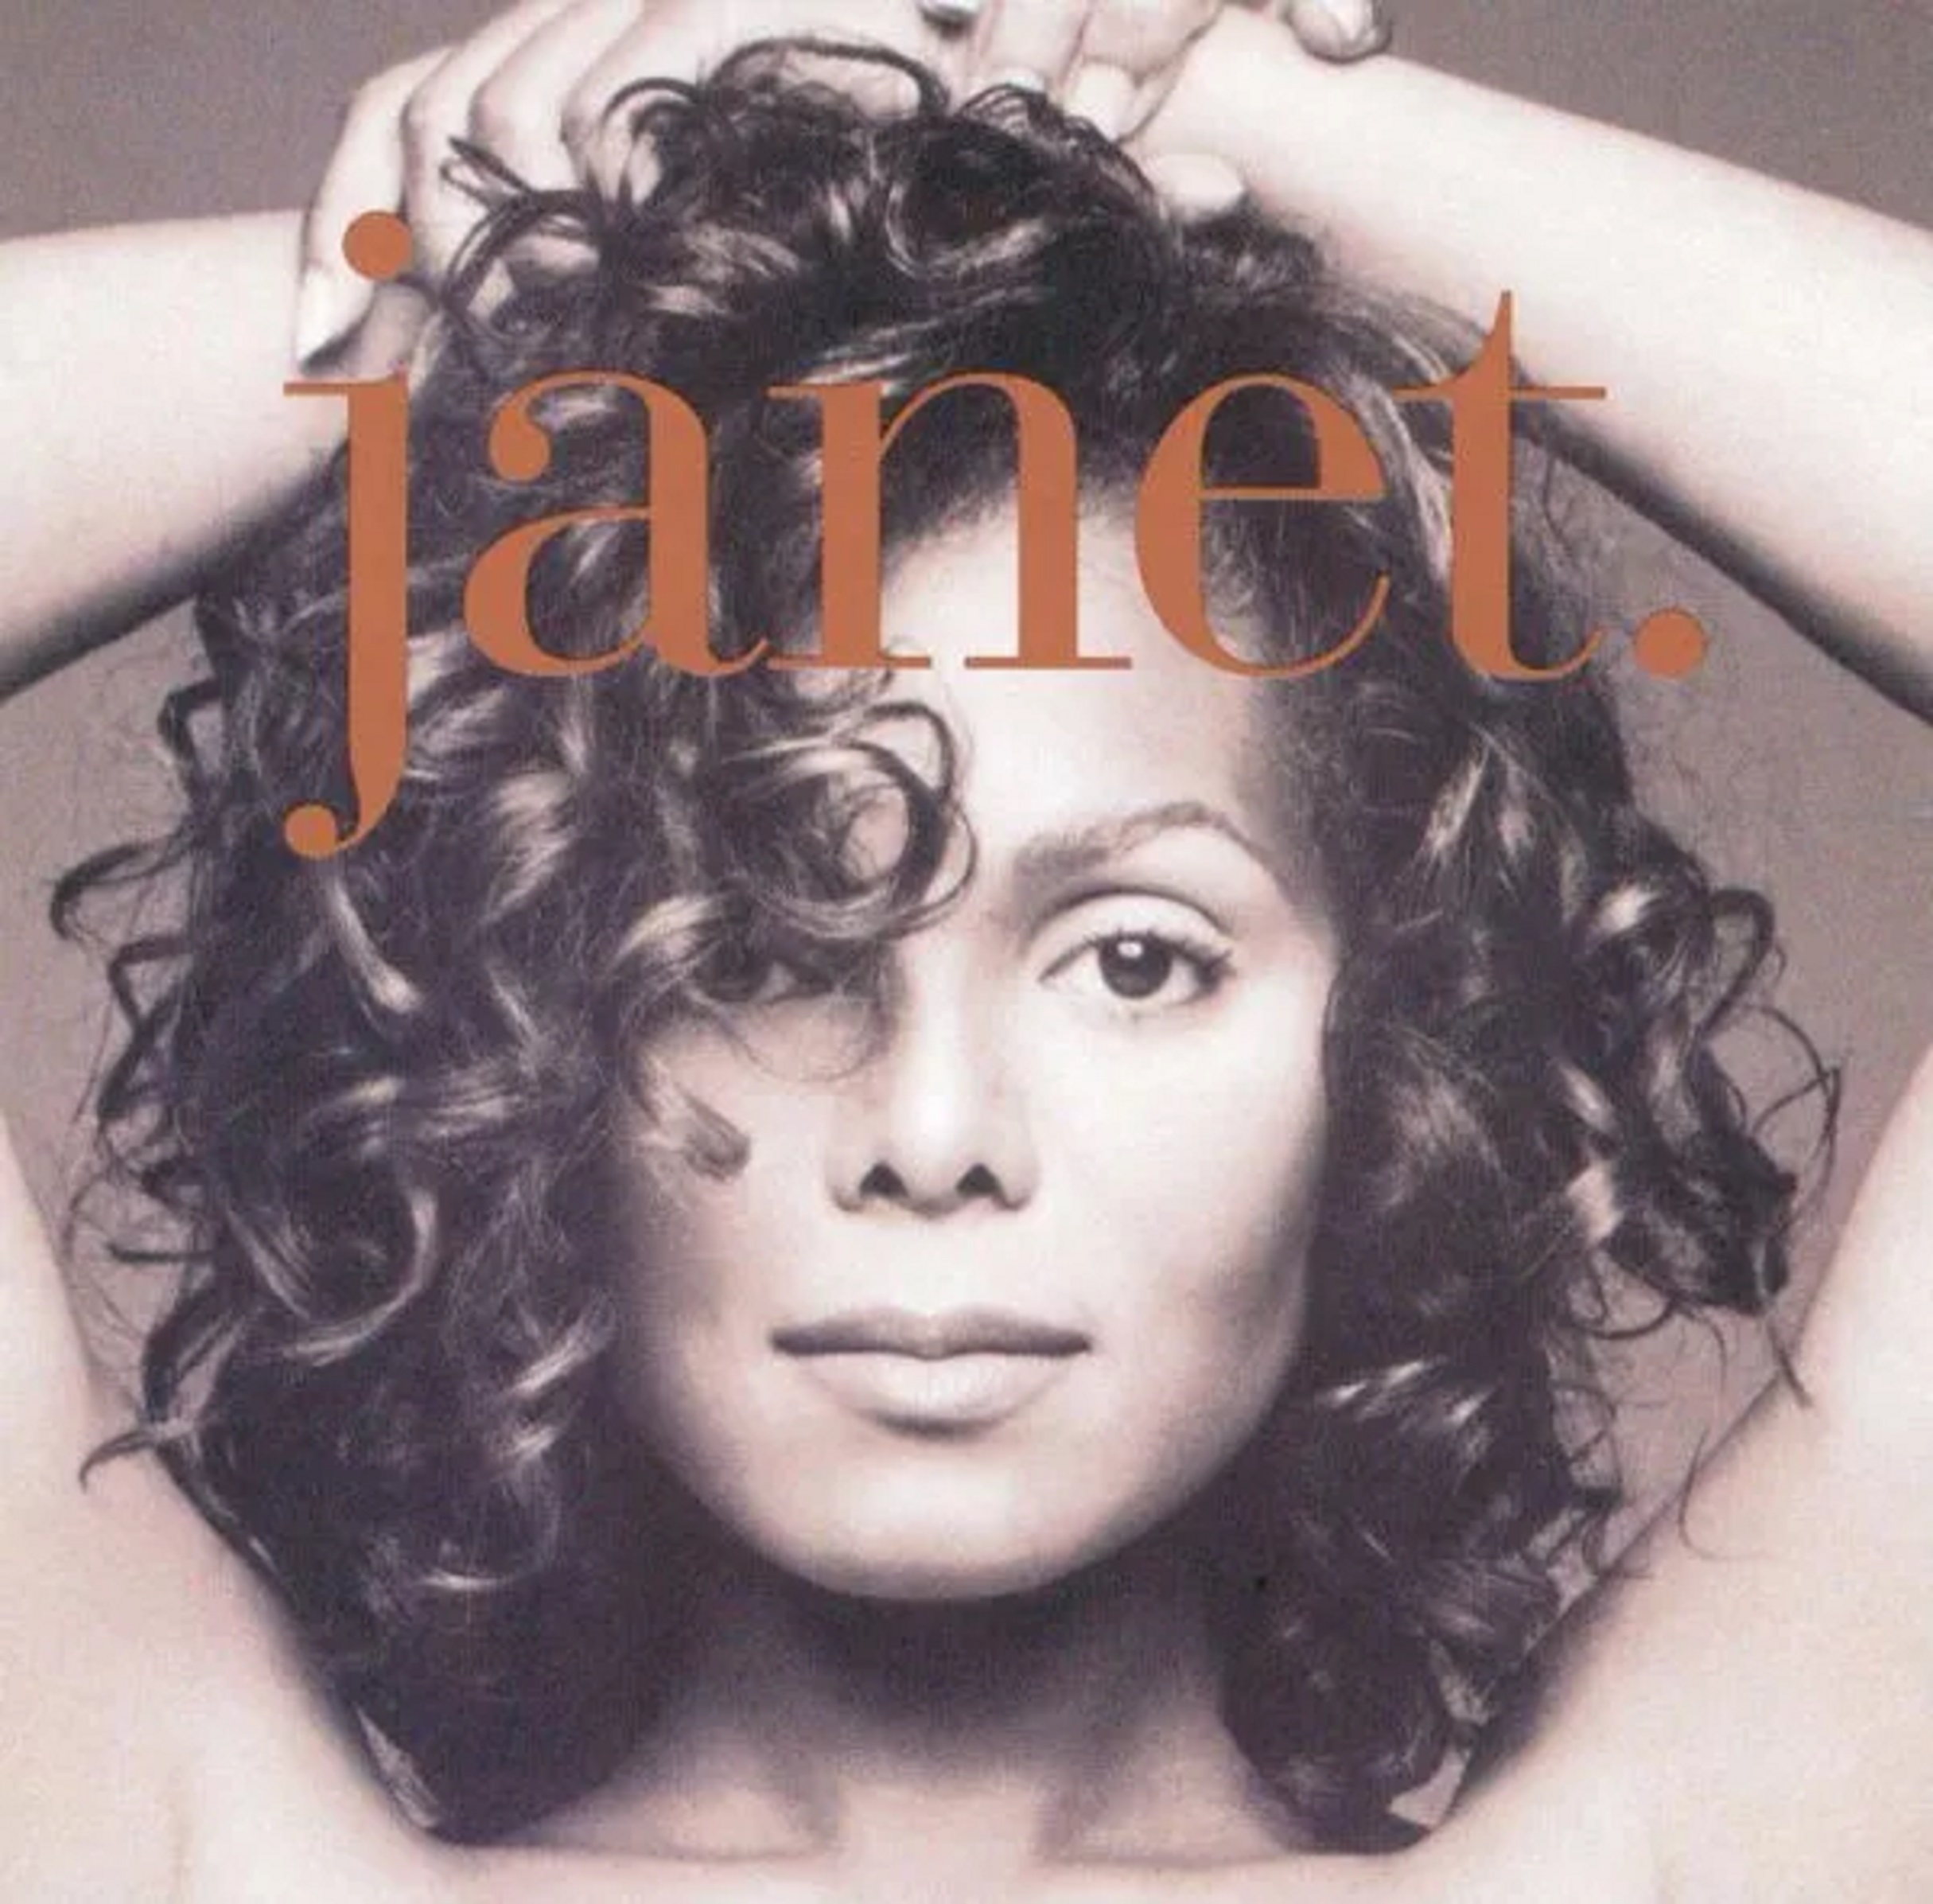 janet-30th-anniversary-deluxe-edition-janet-jackson